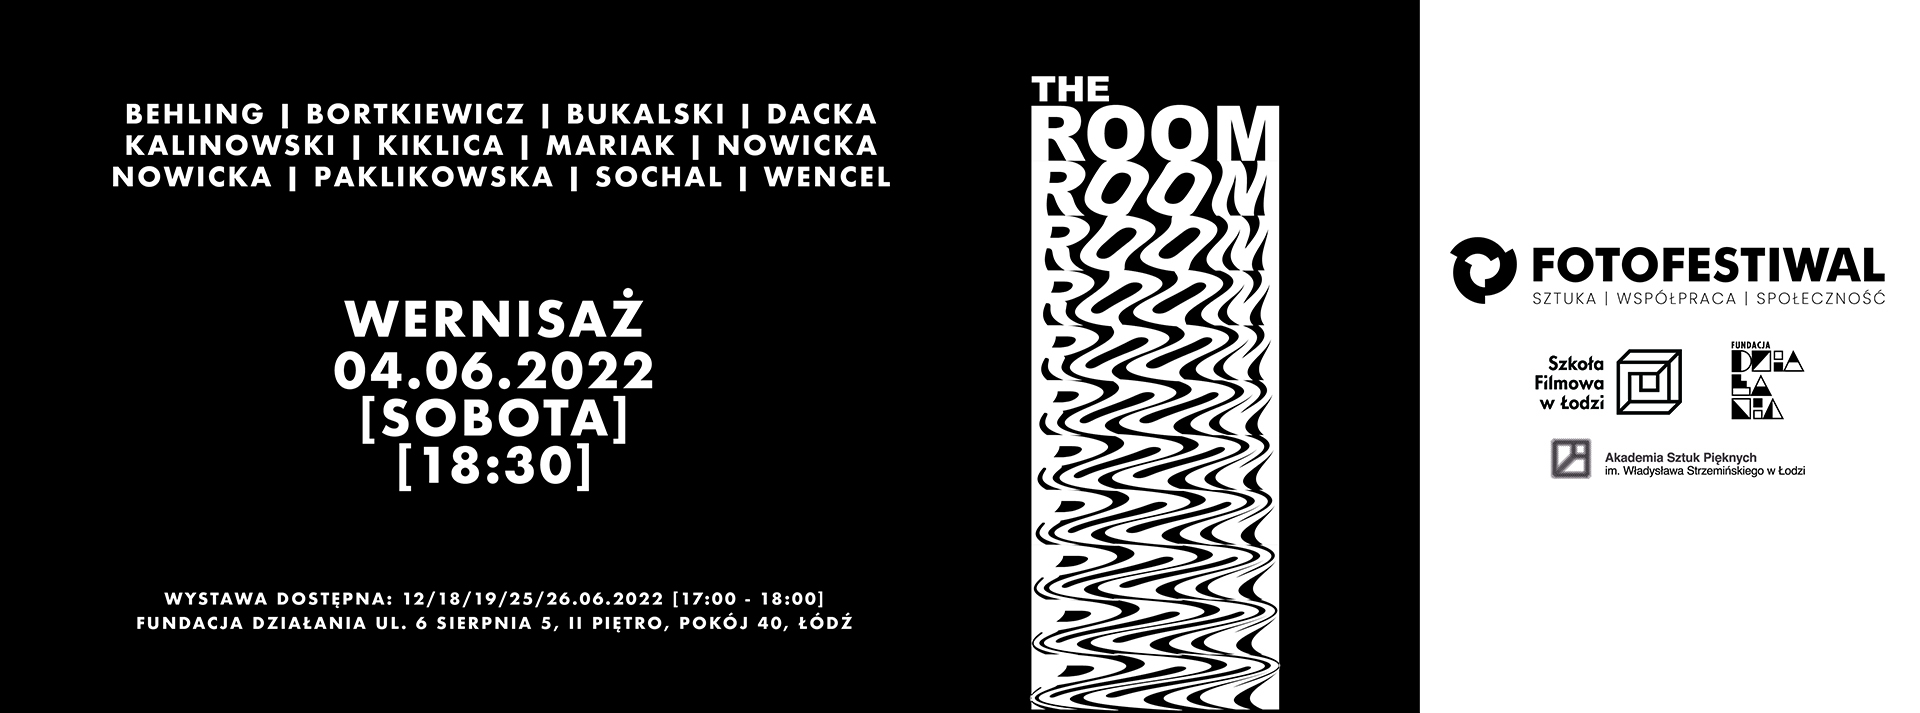 220525-220626-the-room